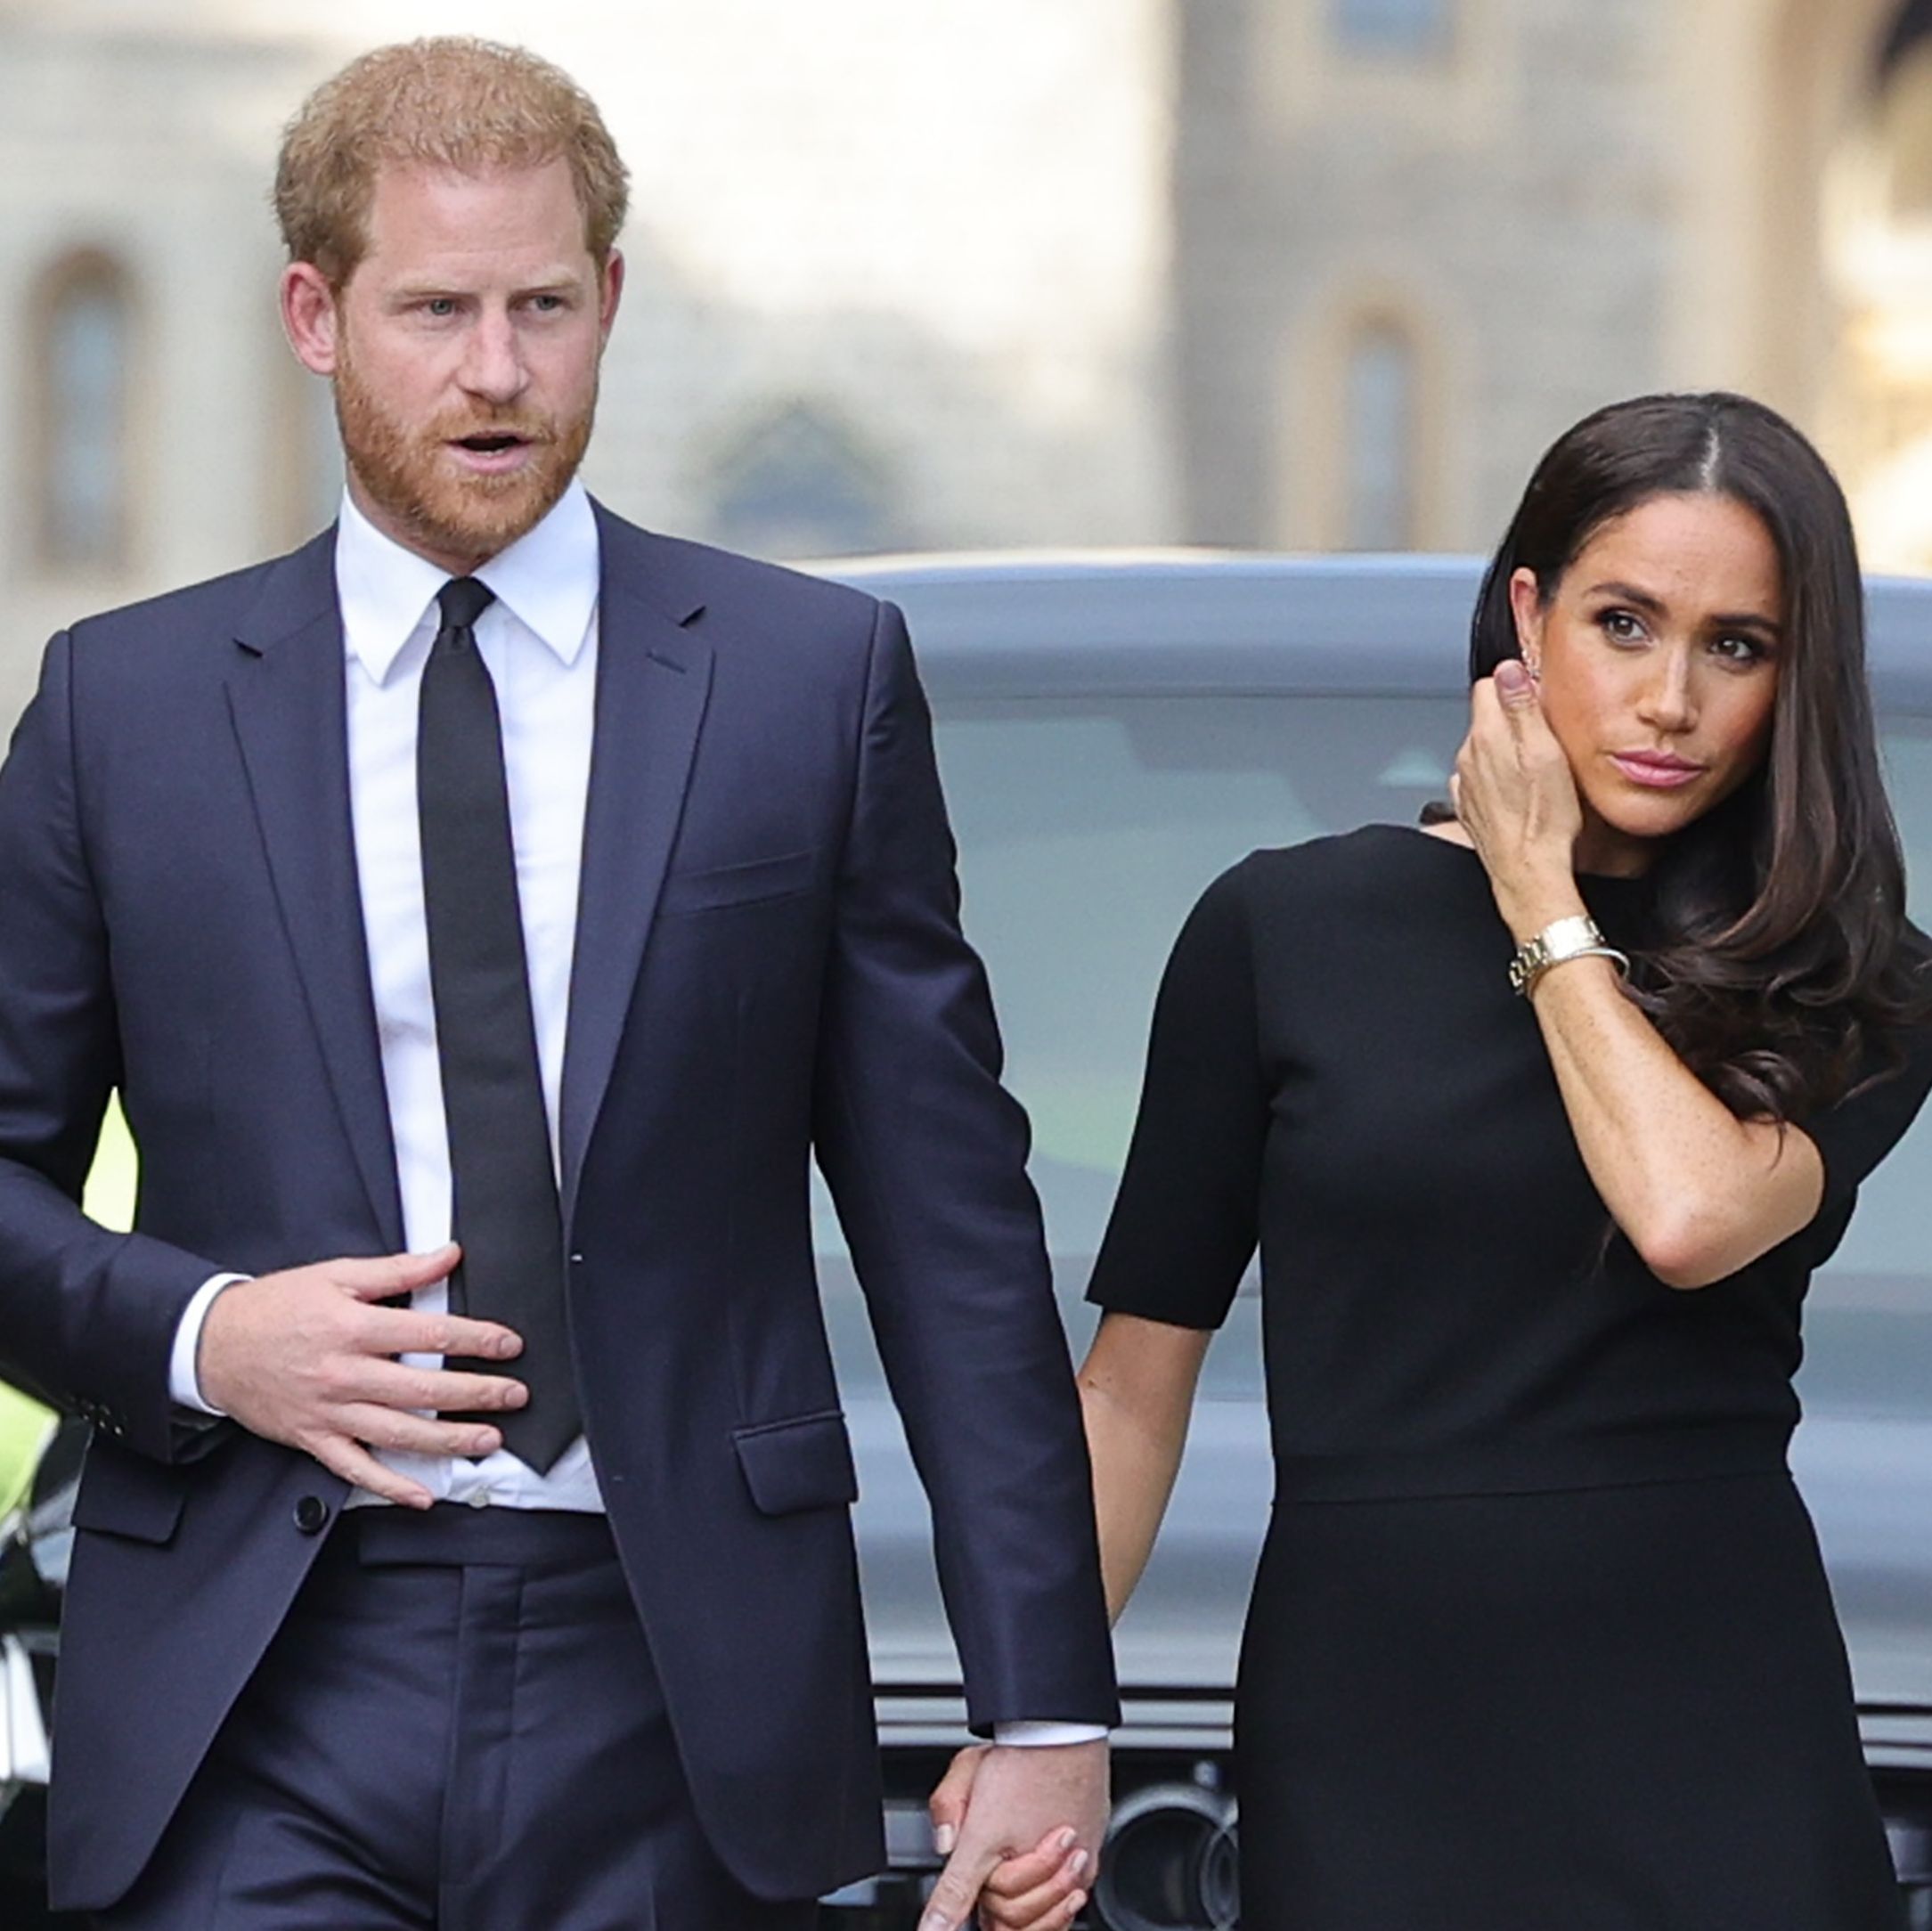 Prince Harry and Meghan Markle Will Only Attend the Coronation Under One Important Condition